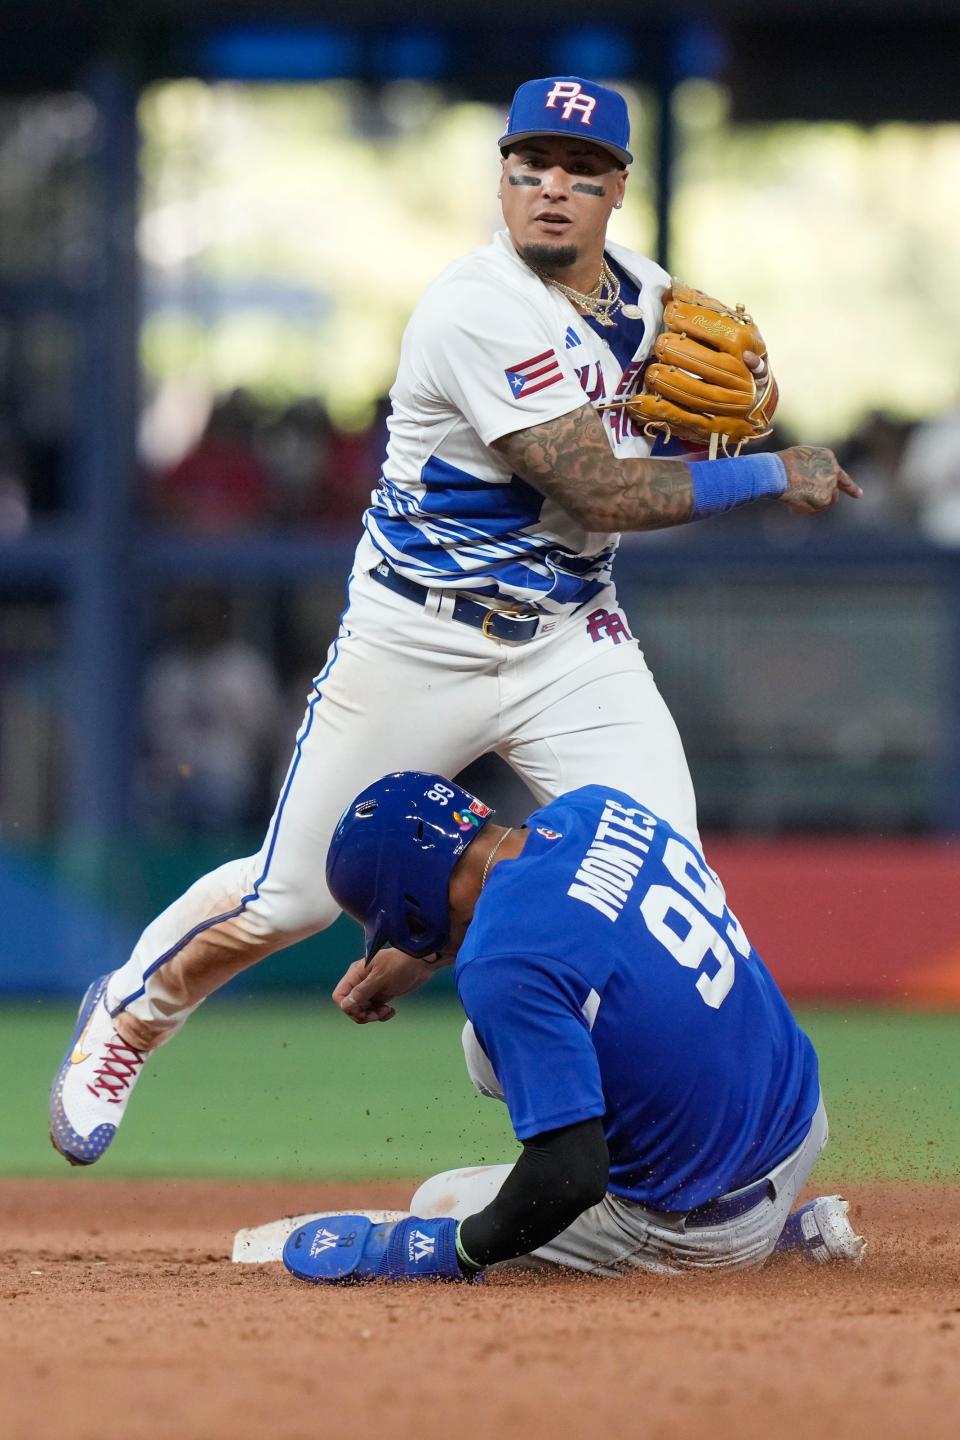 Puerto Rico second baseman Javier Baez completes the double play as Nicaragua Juan Diego Montes slides during the ninth inning of a World Baseball Classic game against Nicaragua, Saturday, March 11, 2023, in Miami.